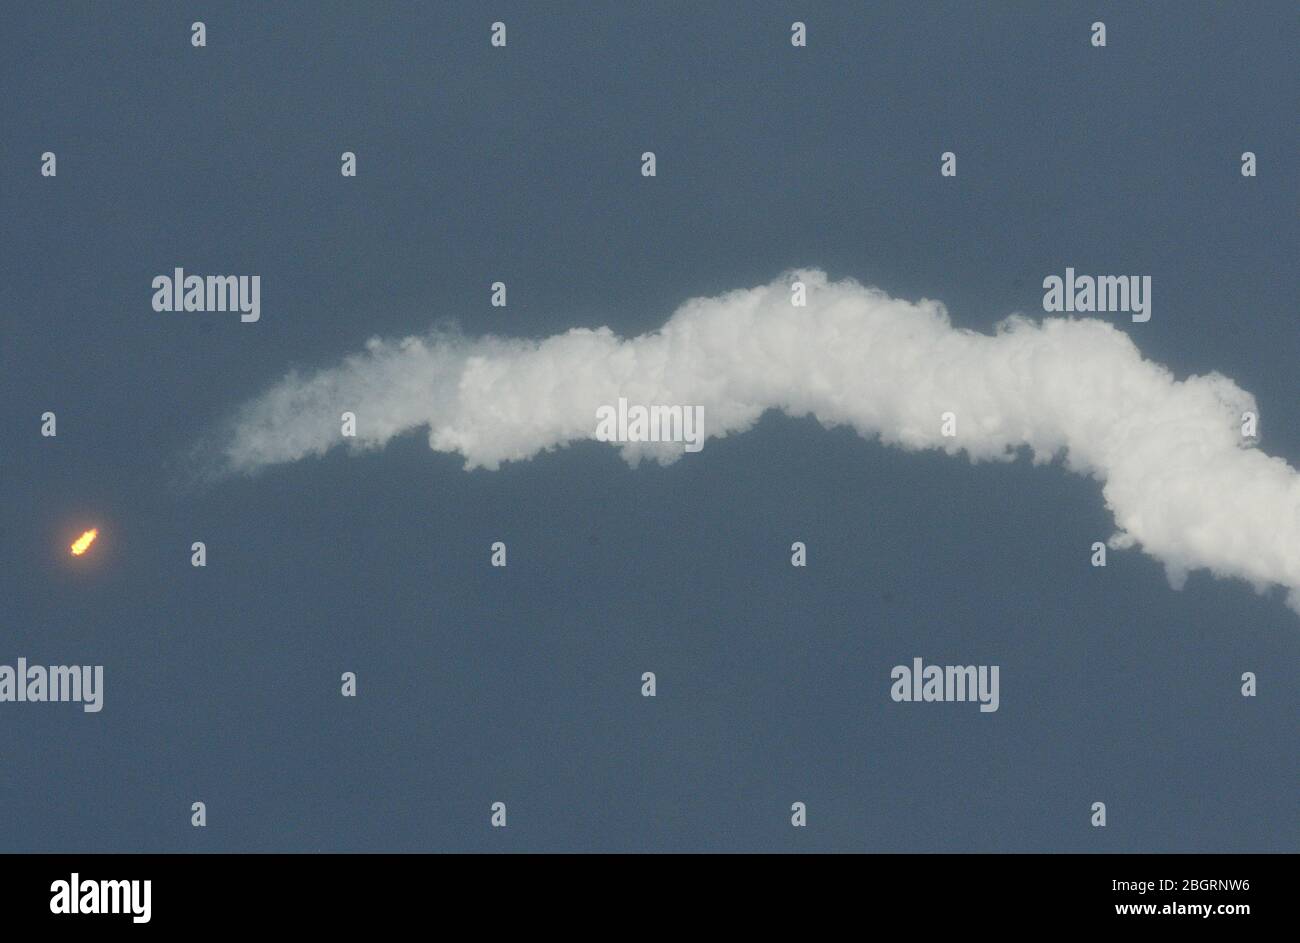 April 22, 2020 - Kennedy Space Center, Florida, United States - A SpaceX Falcon 9 rocket carrying the seventh batch of 60 Starlink satellites which will provide global internet service successfully launches on April 22, 2020 from pad 39A at the Kennedy Space Center in Florida. (Paul Hennessy/Alamy) Stock Photo